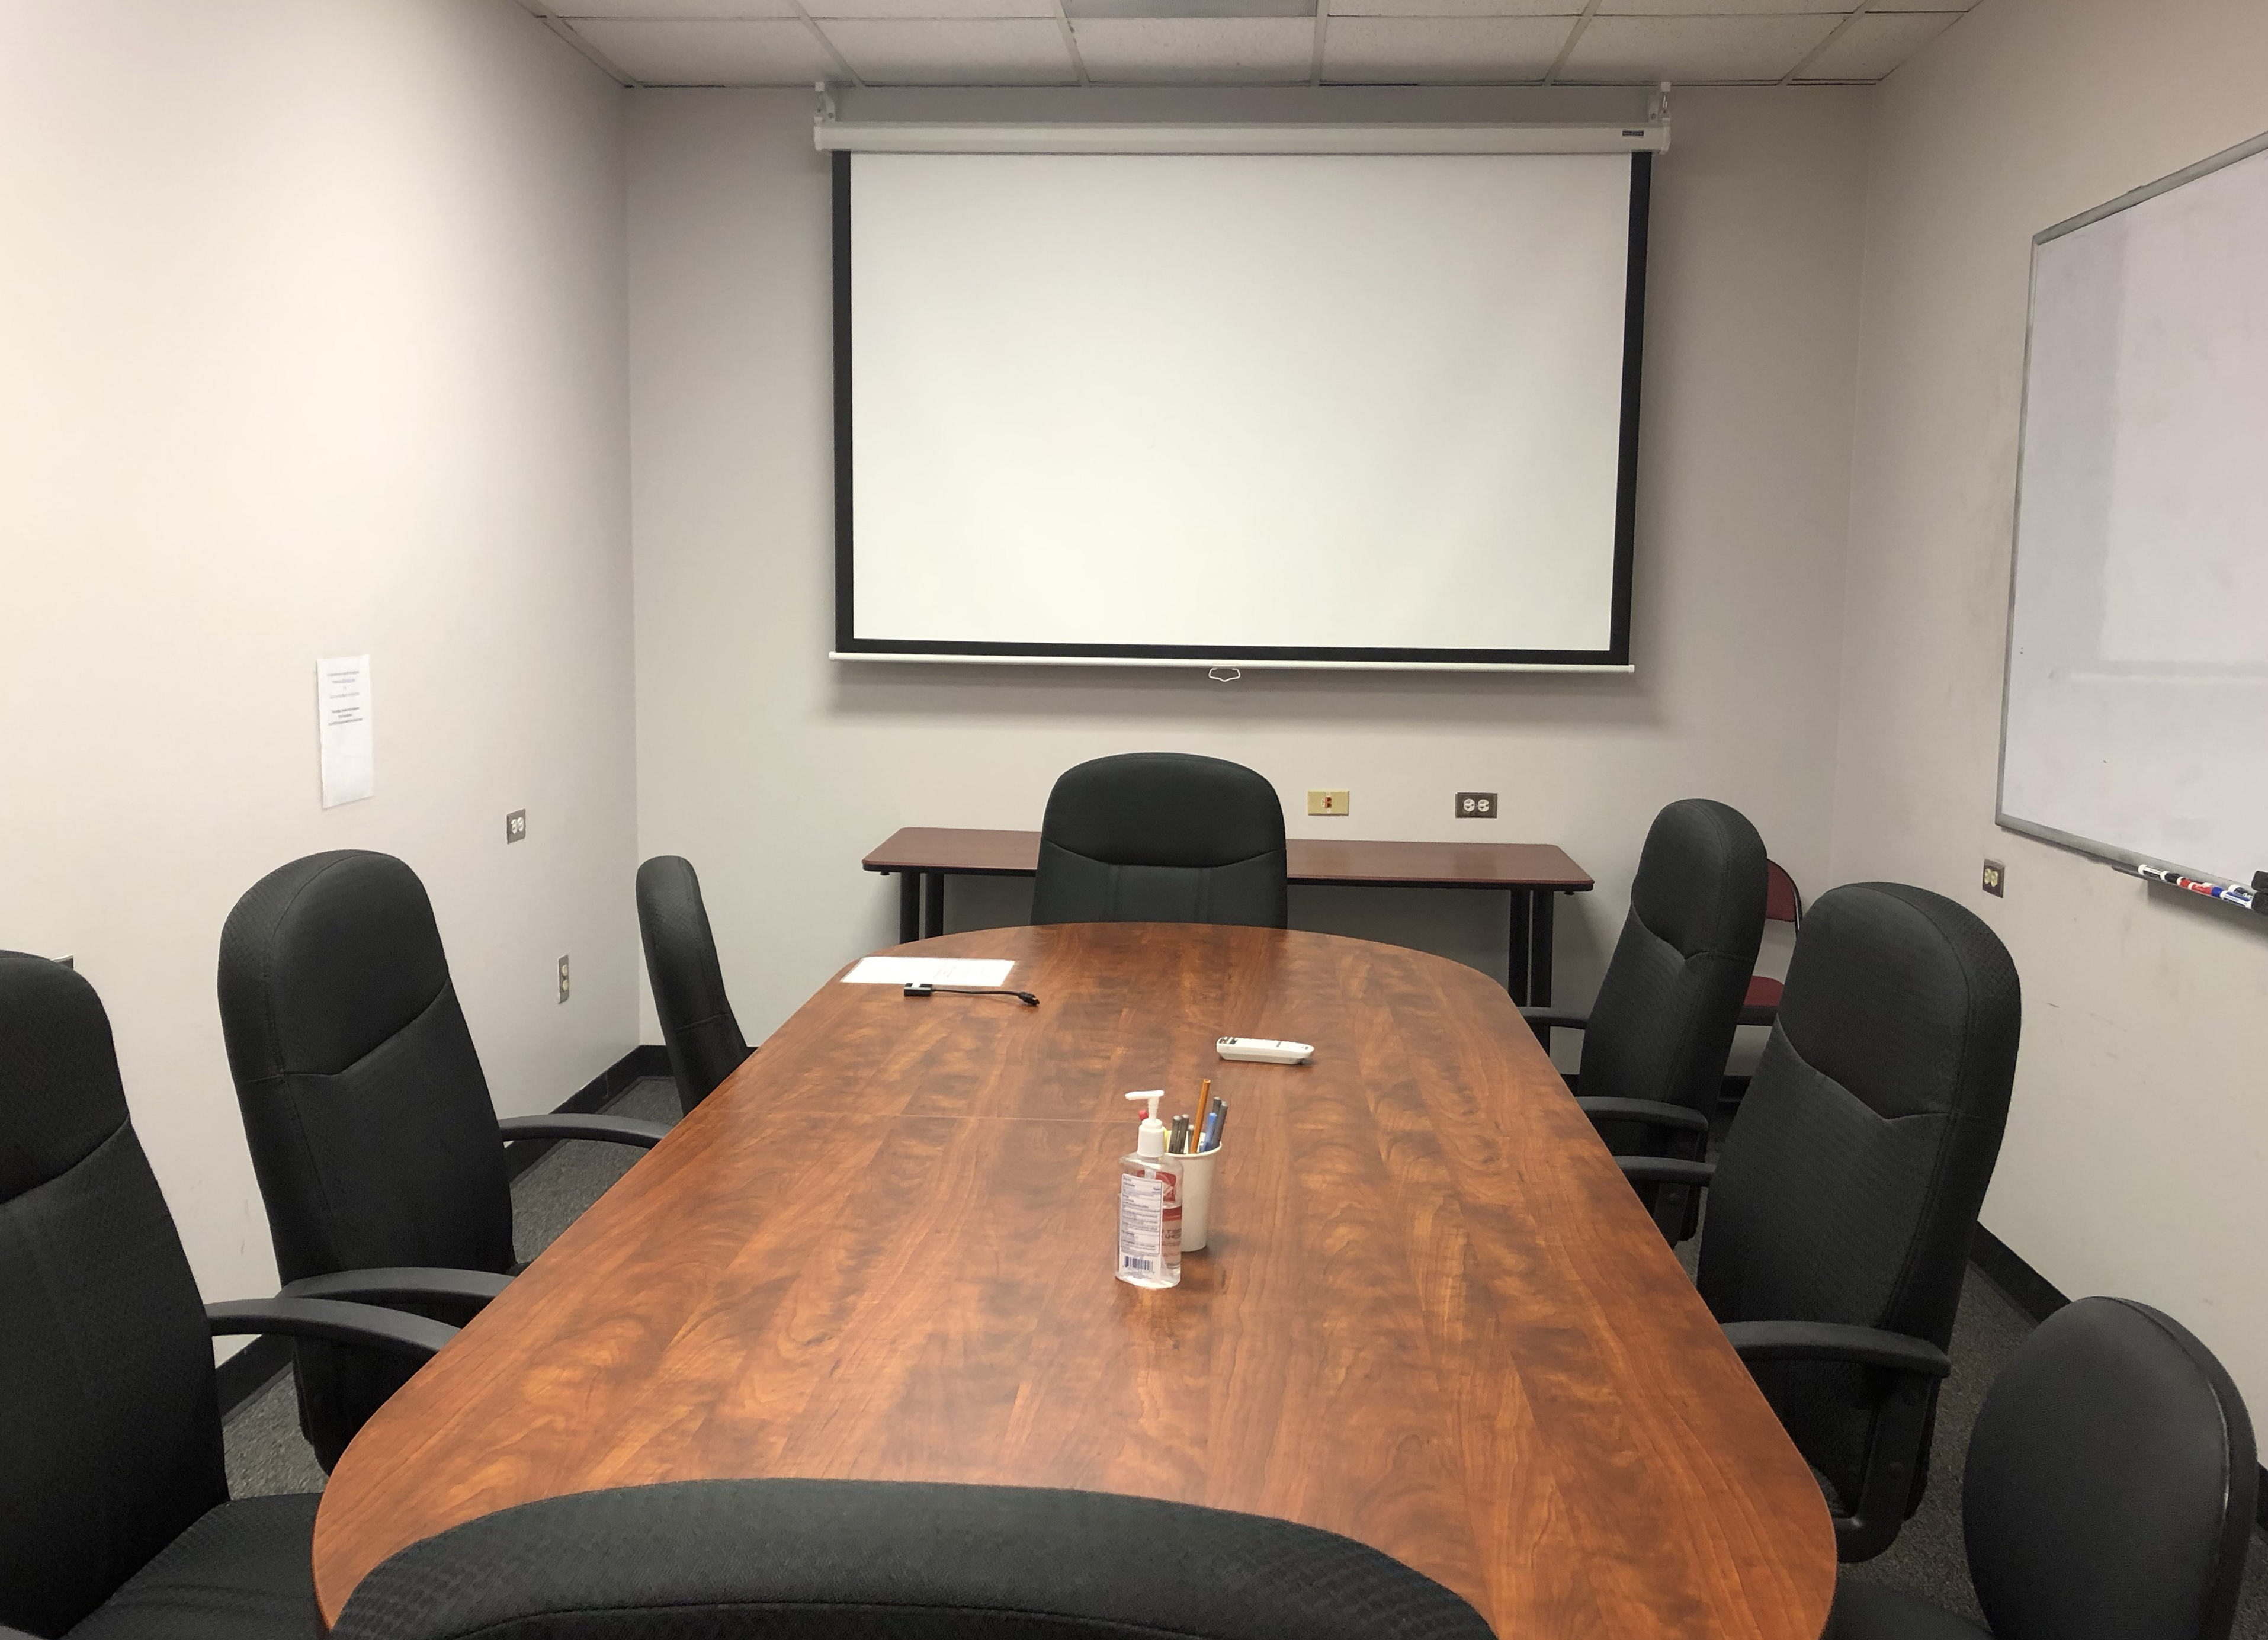 Pgh Conference Rooms Schedule Reservation And Events University Of Houston